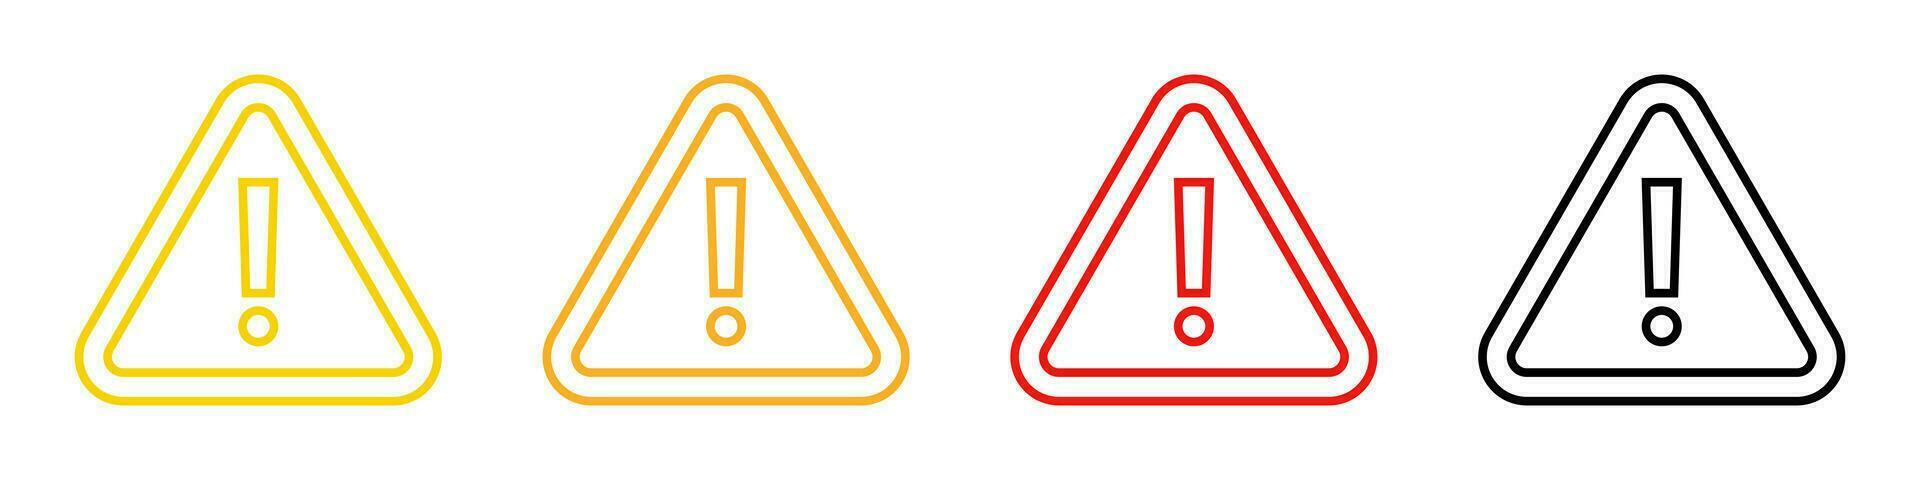 Outline triangle warning sign collection. Isolated attention warn in red and orange on white background. Yellow and black road signal with exclamation mark. Vector illustration. EPS 10.